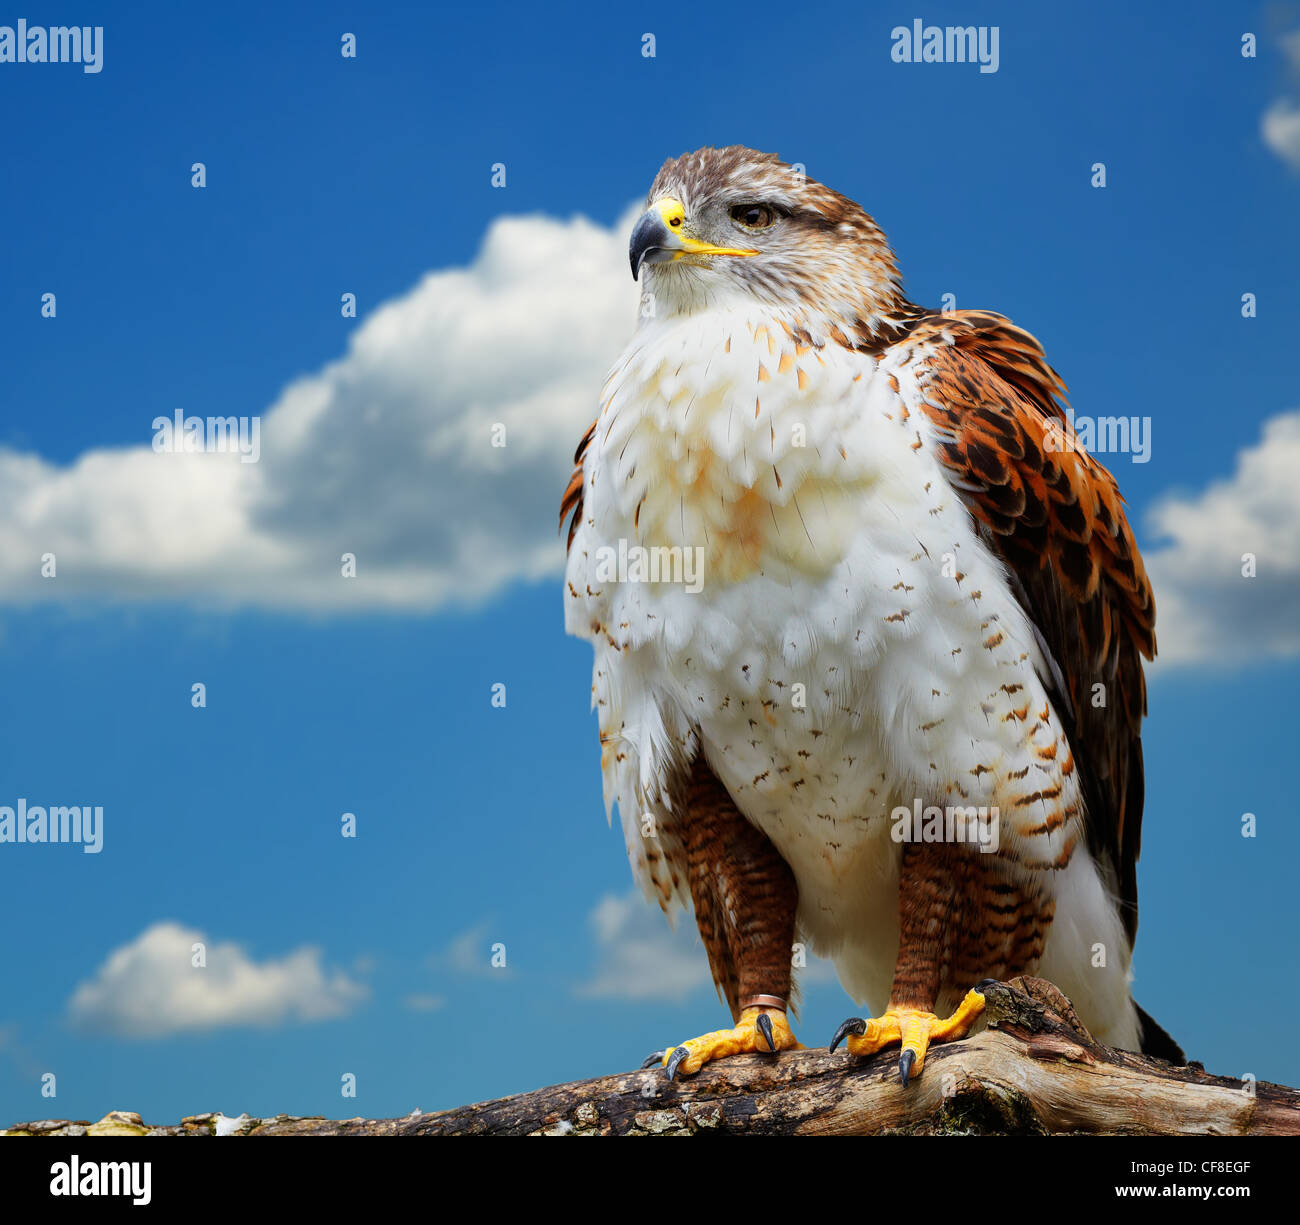 Close up of Buteo regalis against the blue sky. Photo taken at Ailwee, Birds of Prey center, Ireland. Stock Photo